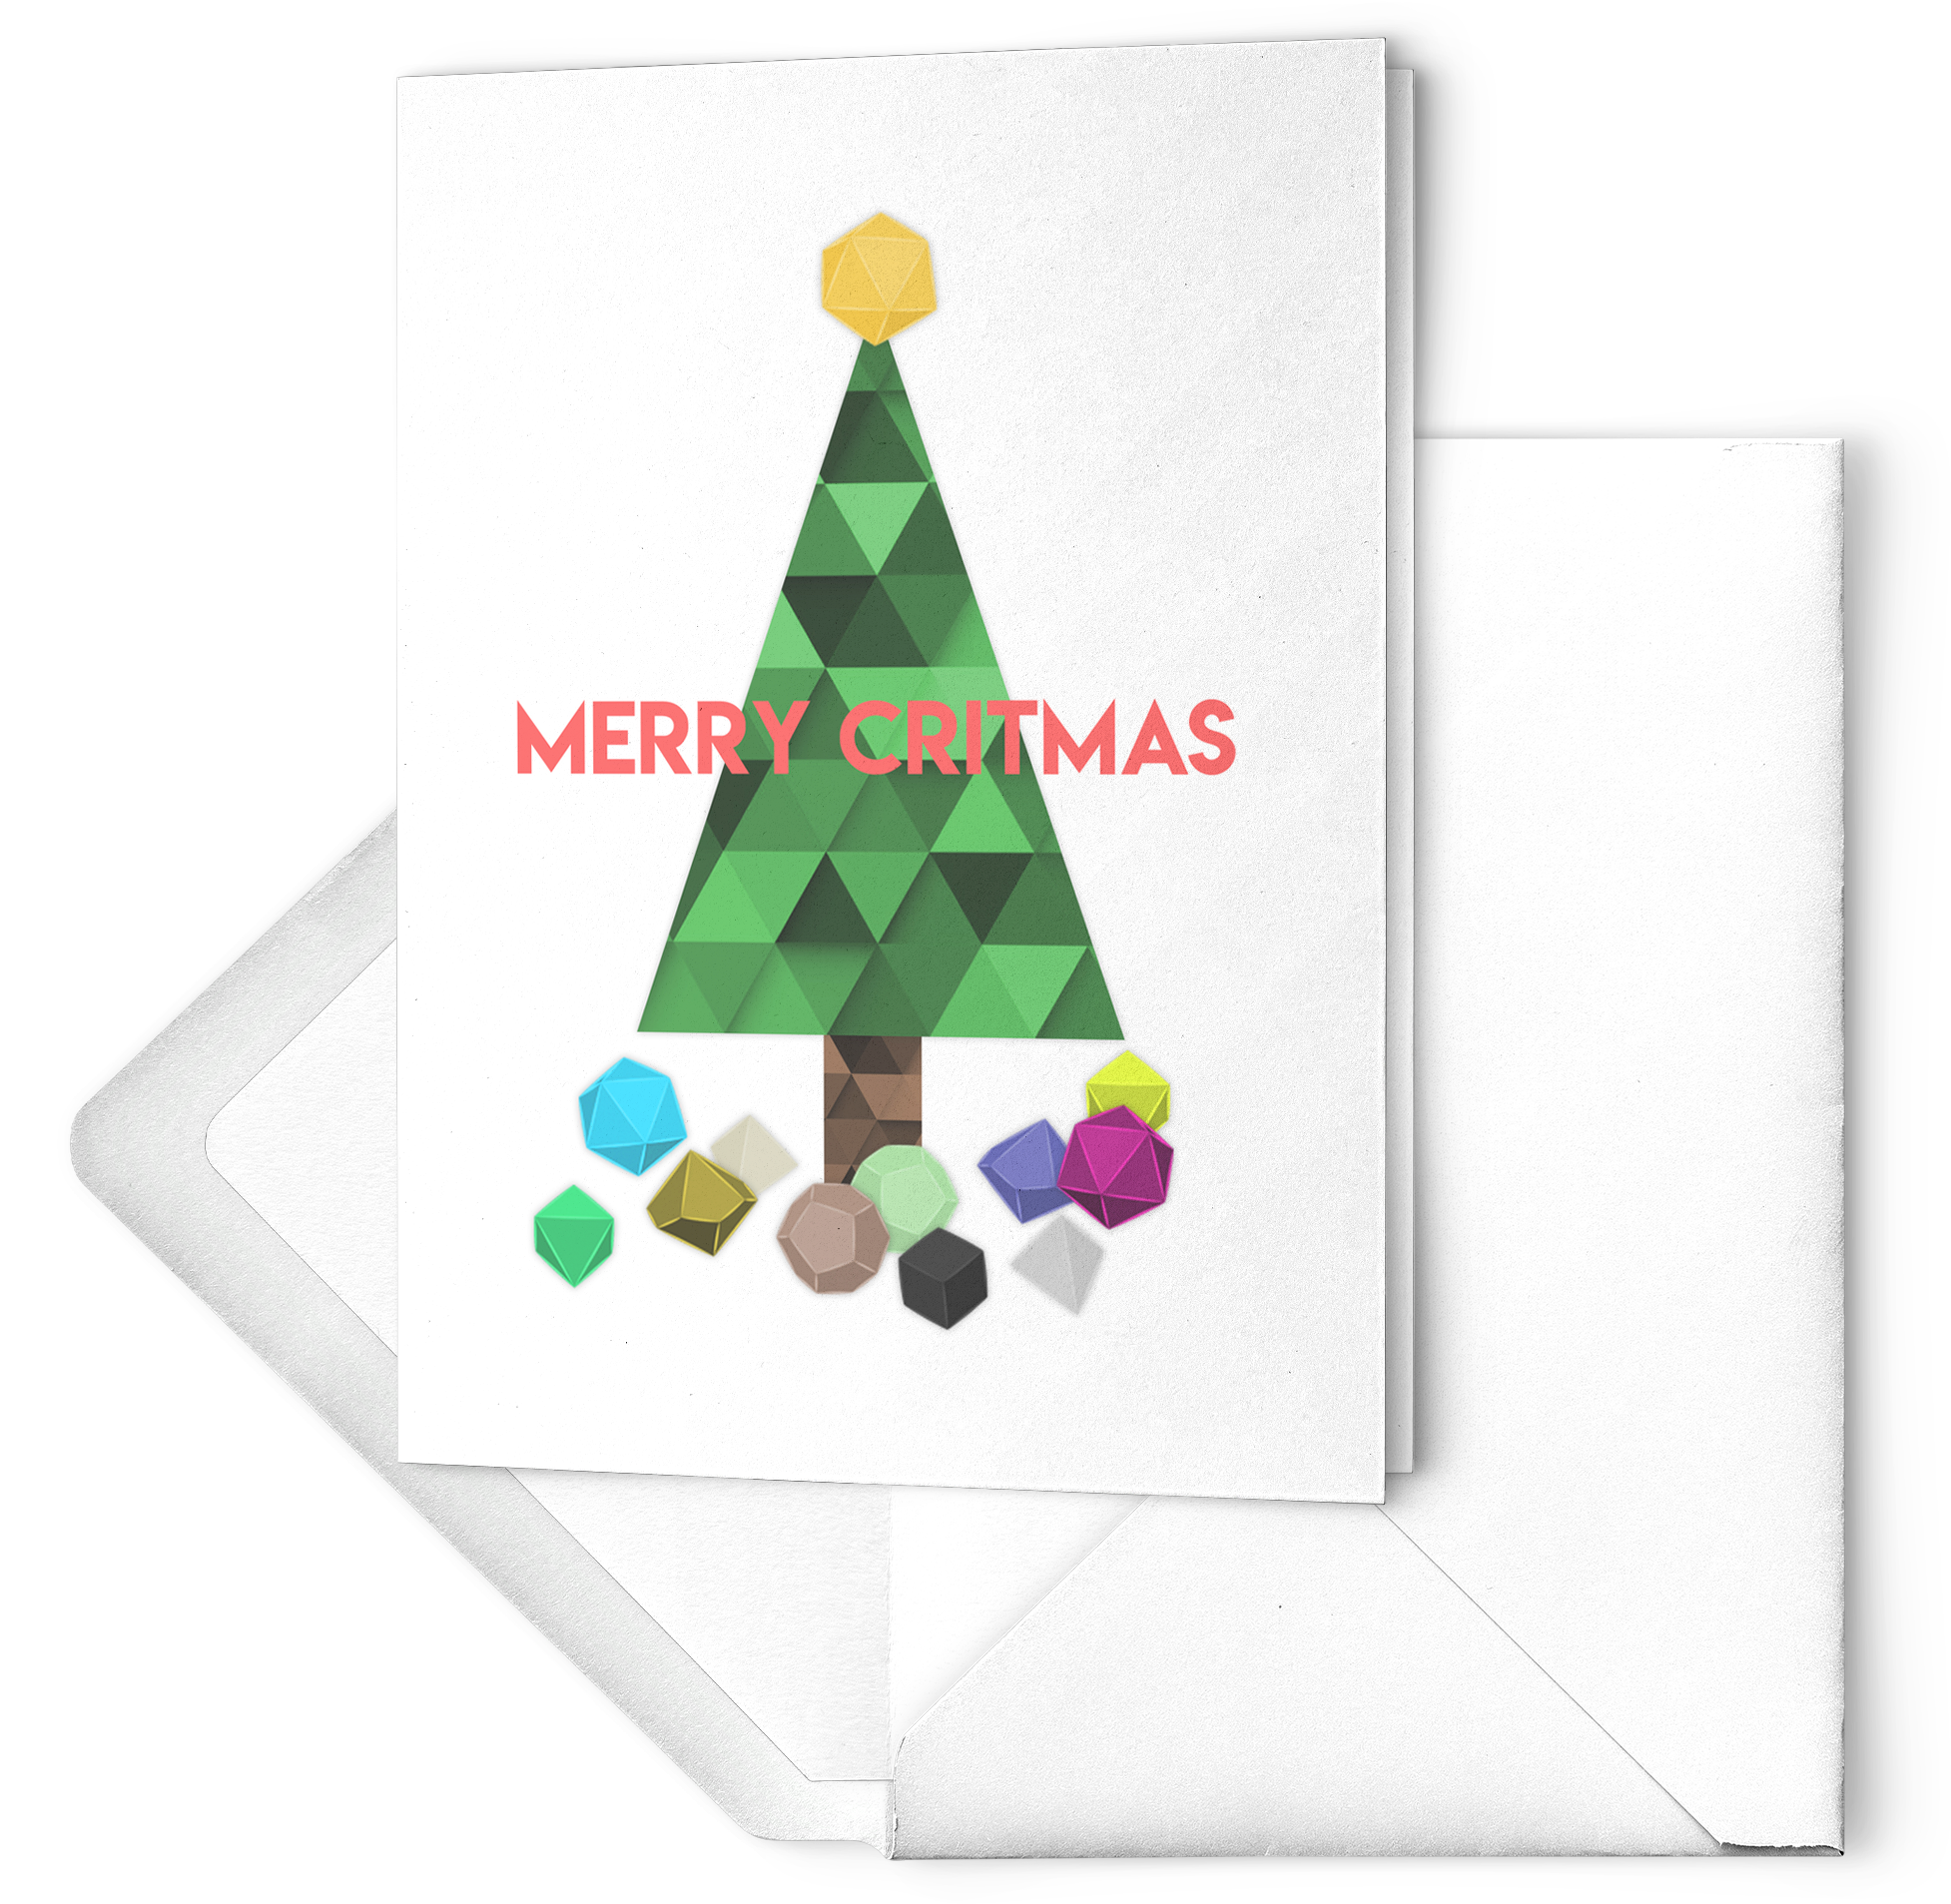 Merry Critmas - Christmas Tree (2000x2000), Png Download